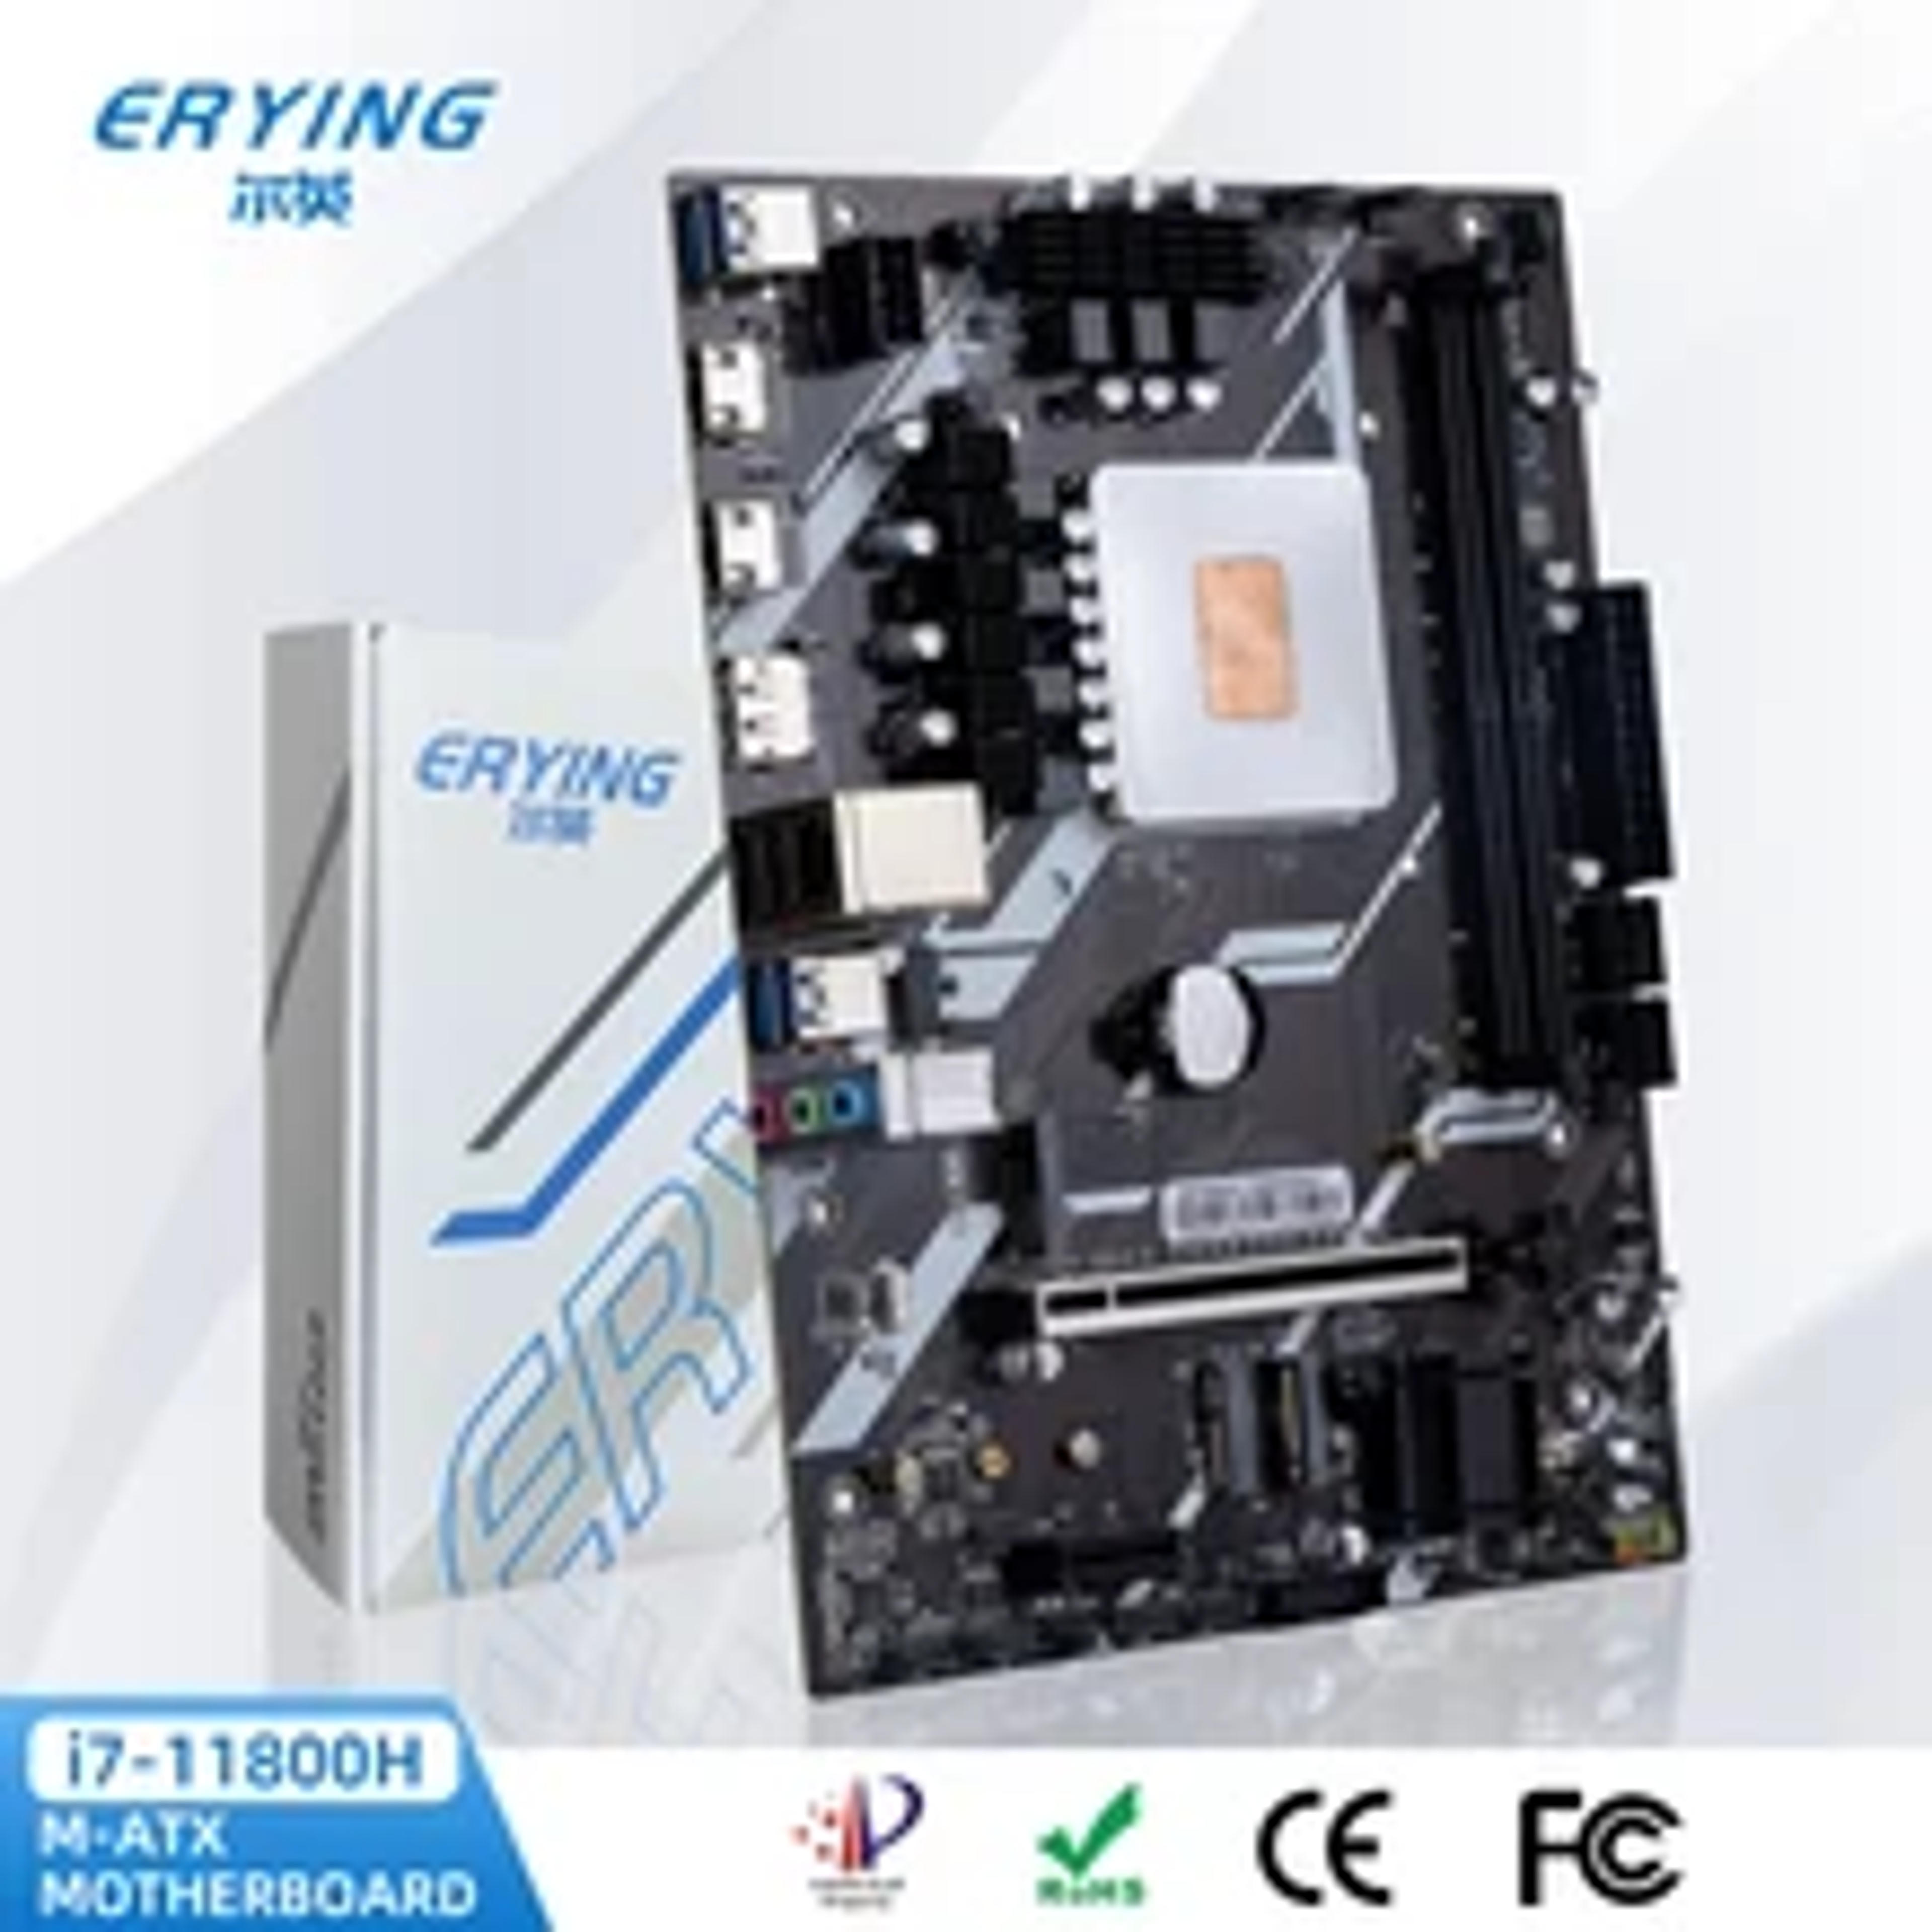 Diy Gaming Pc Motherboard With Embed 11th Core Cpu 0000 Es 2.6ghz On Board (for Product Performance, Please Refer To I9-11900h) - Demo Board - AliExpress